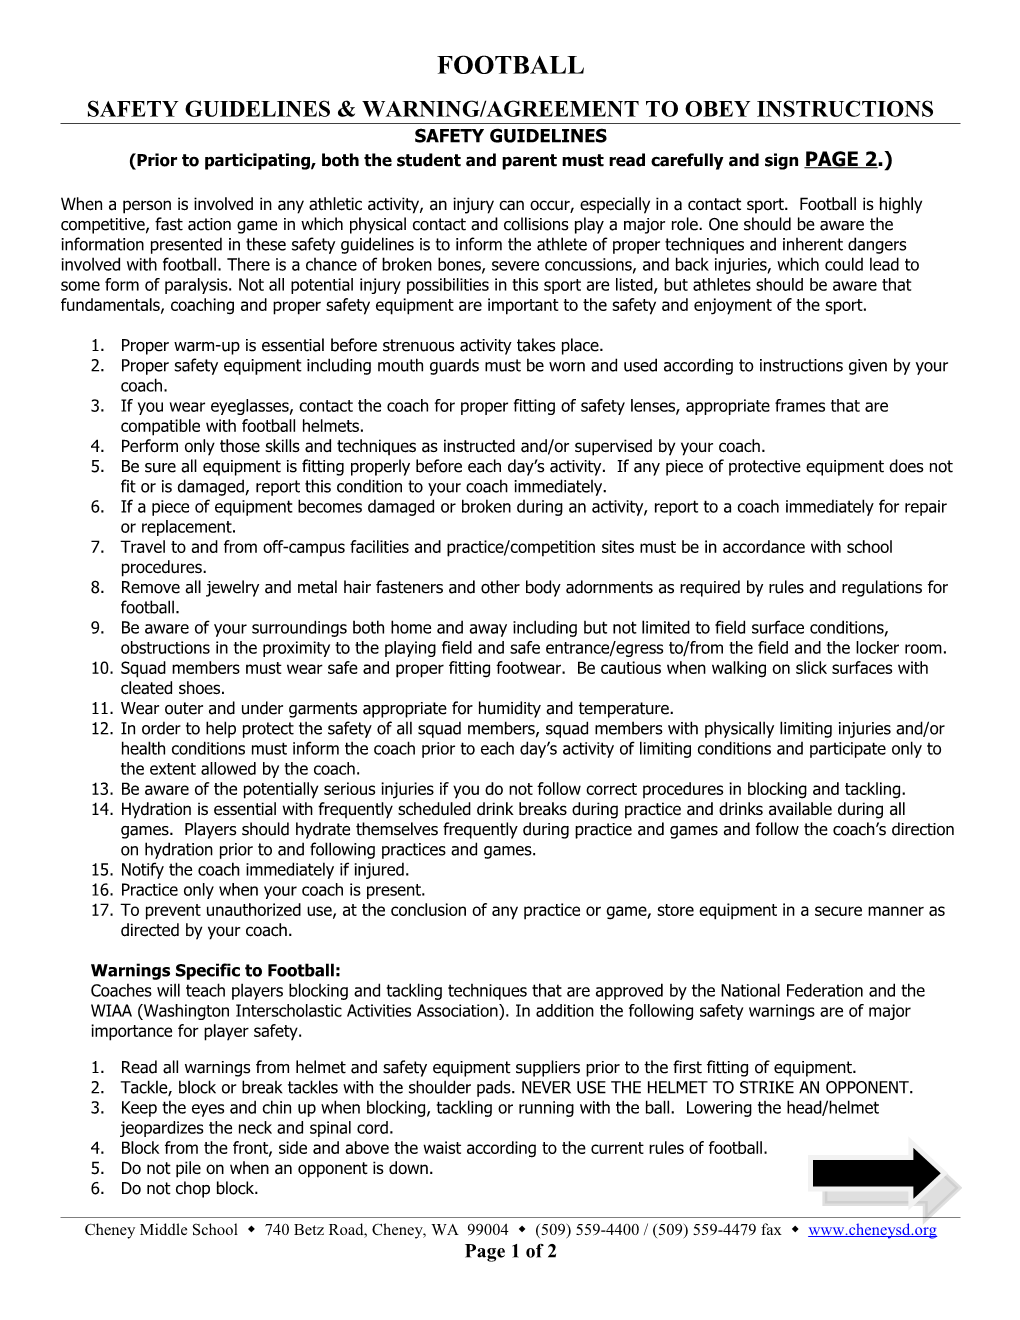 Safety Guidelines & Warning/Agreement to Obey Instructions